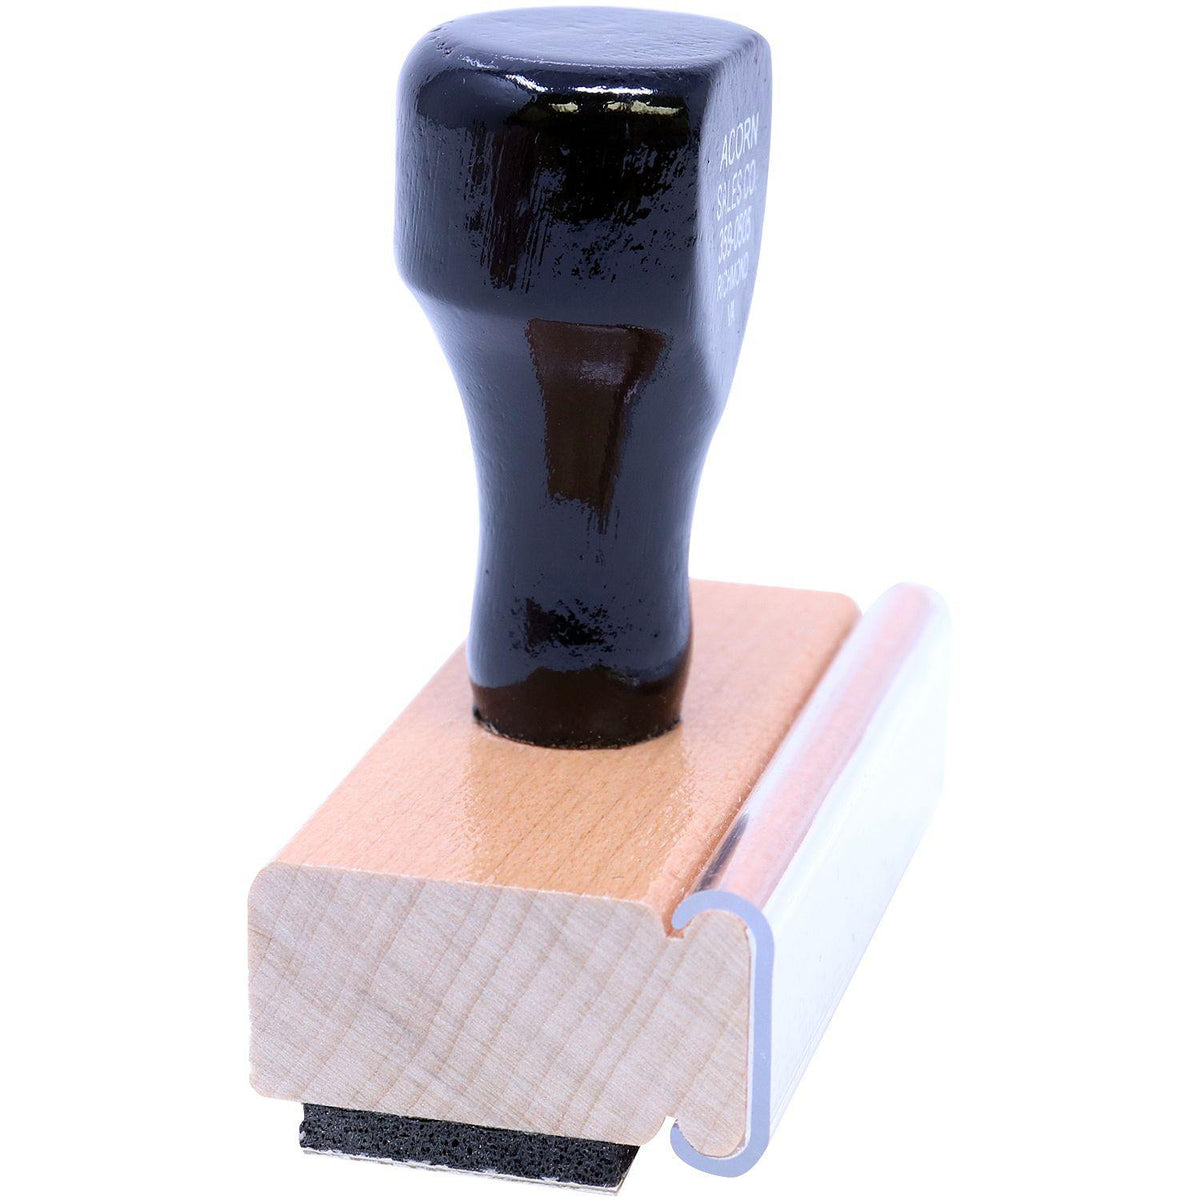 Large Special Rubber Stamp - Engineer Seal Stamps - Brand_Acorn, Impression Size_Large, Stamp Type_Regular Stamp, Type of Use_Mailing